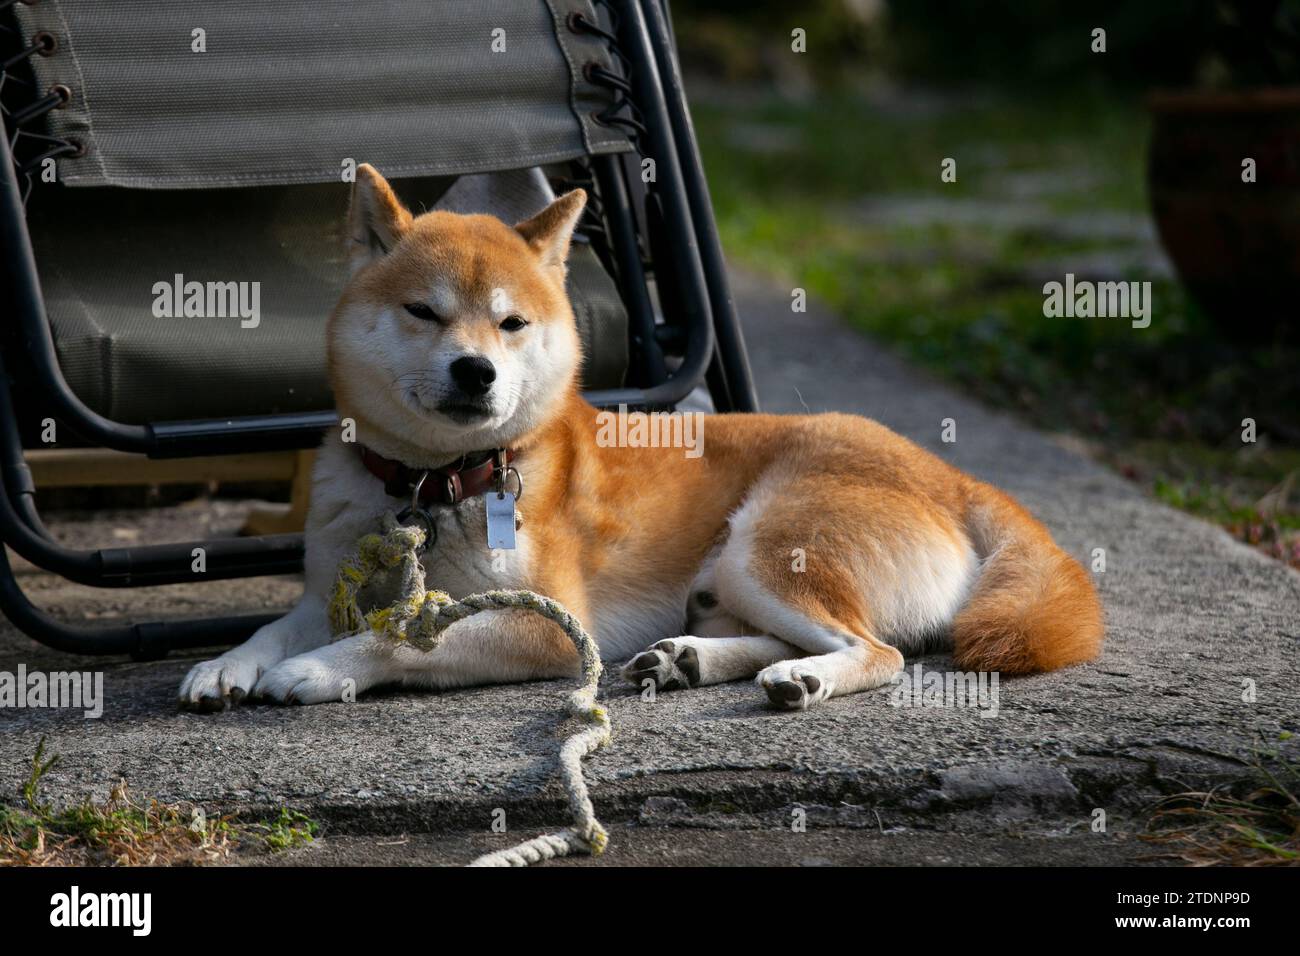 The shiba inu (柴犬, shiba inu) is a small and agile breed of dog, originally from Japan, which was originally bred and developed as a hunting dog. Stock Photo